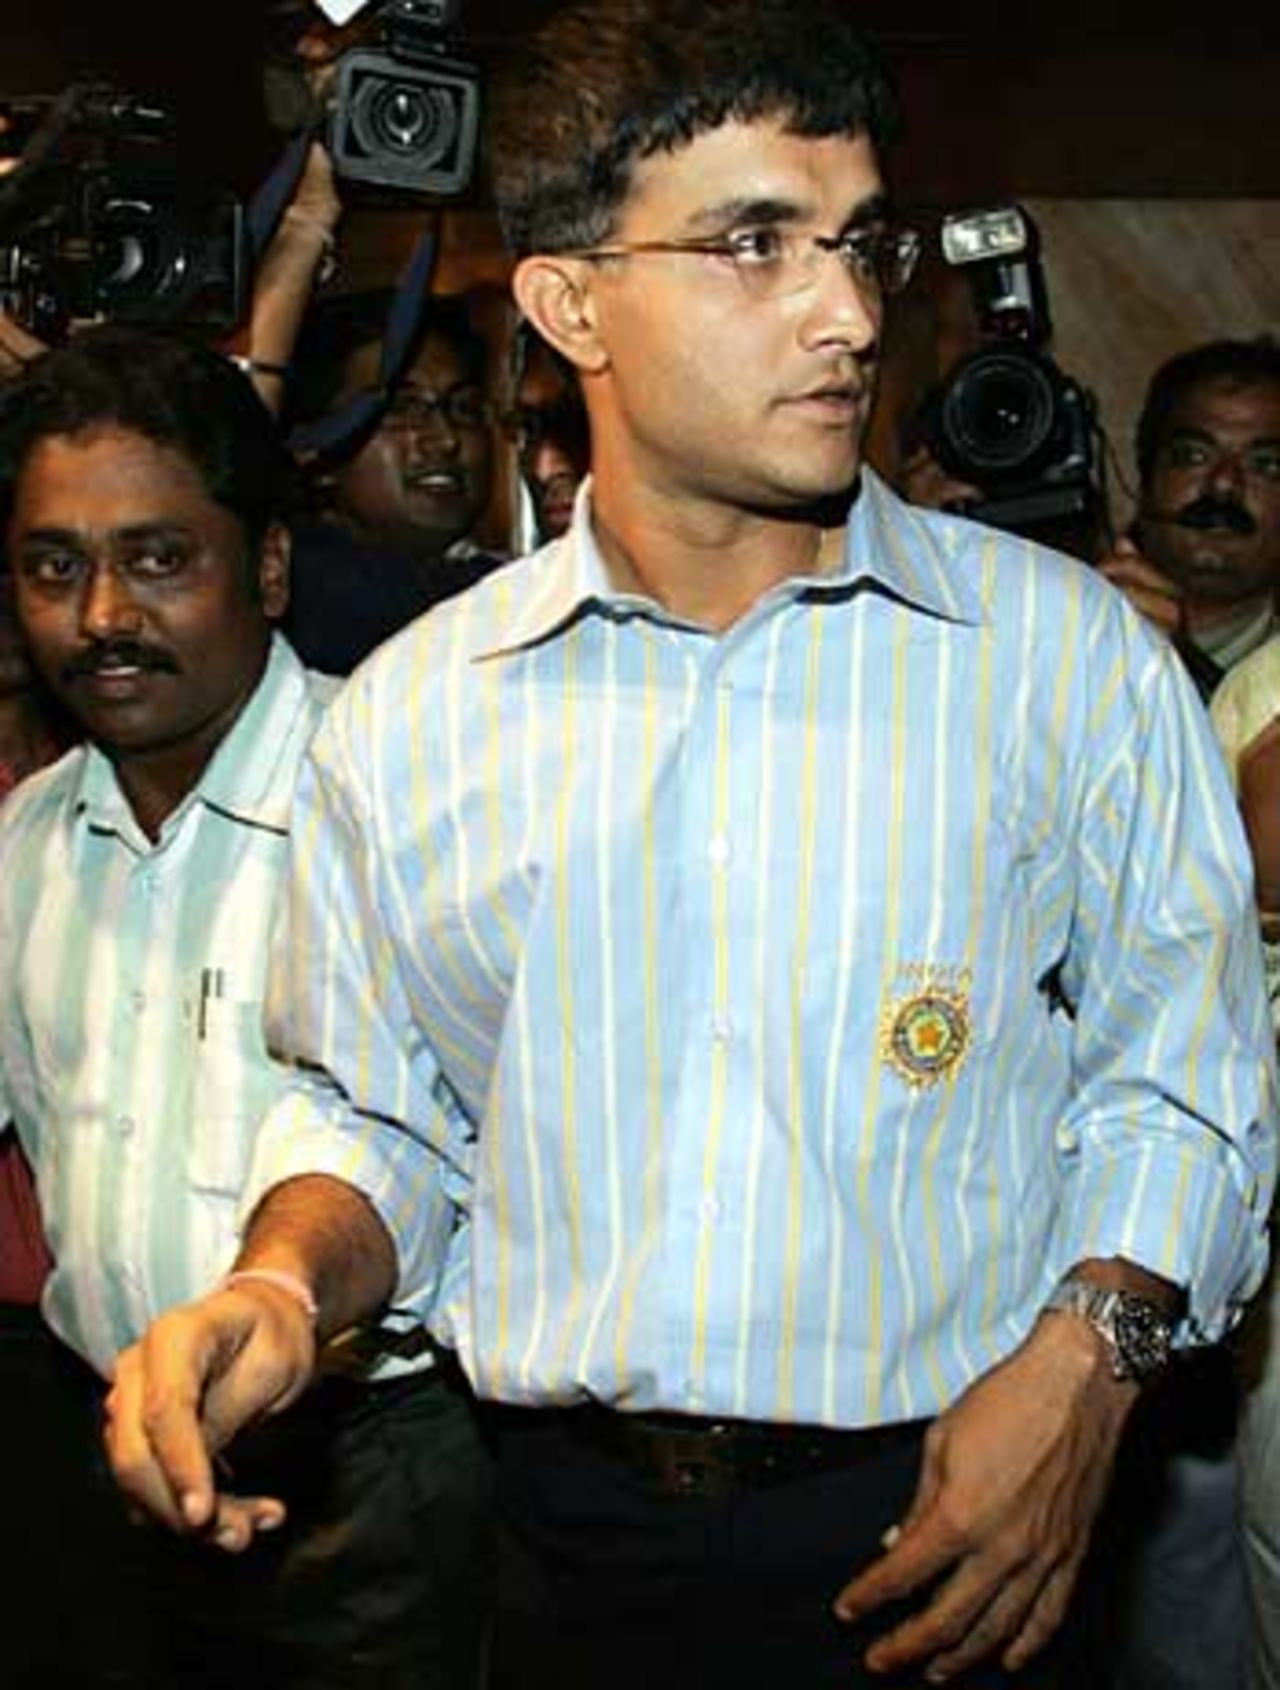 Sourav Ganguly leaves the review hearing in Mumbai after speaking to the panel about the relationship between him and Greg Chappell, Mumbai, September 27